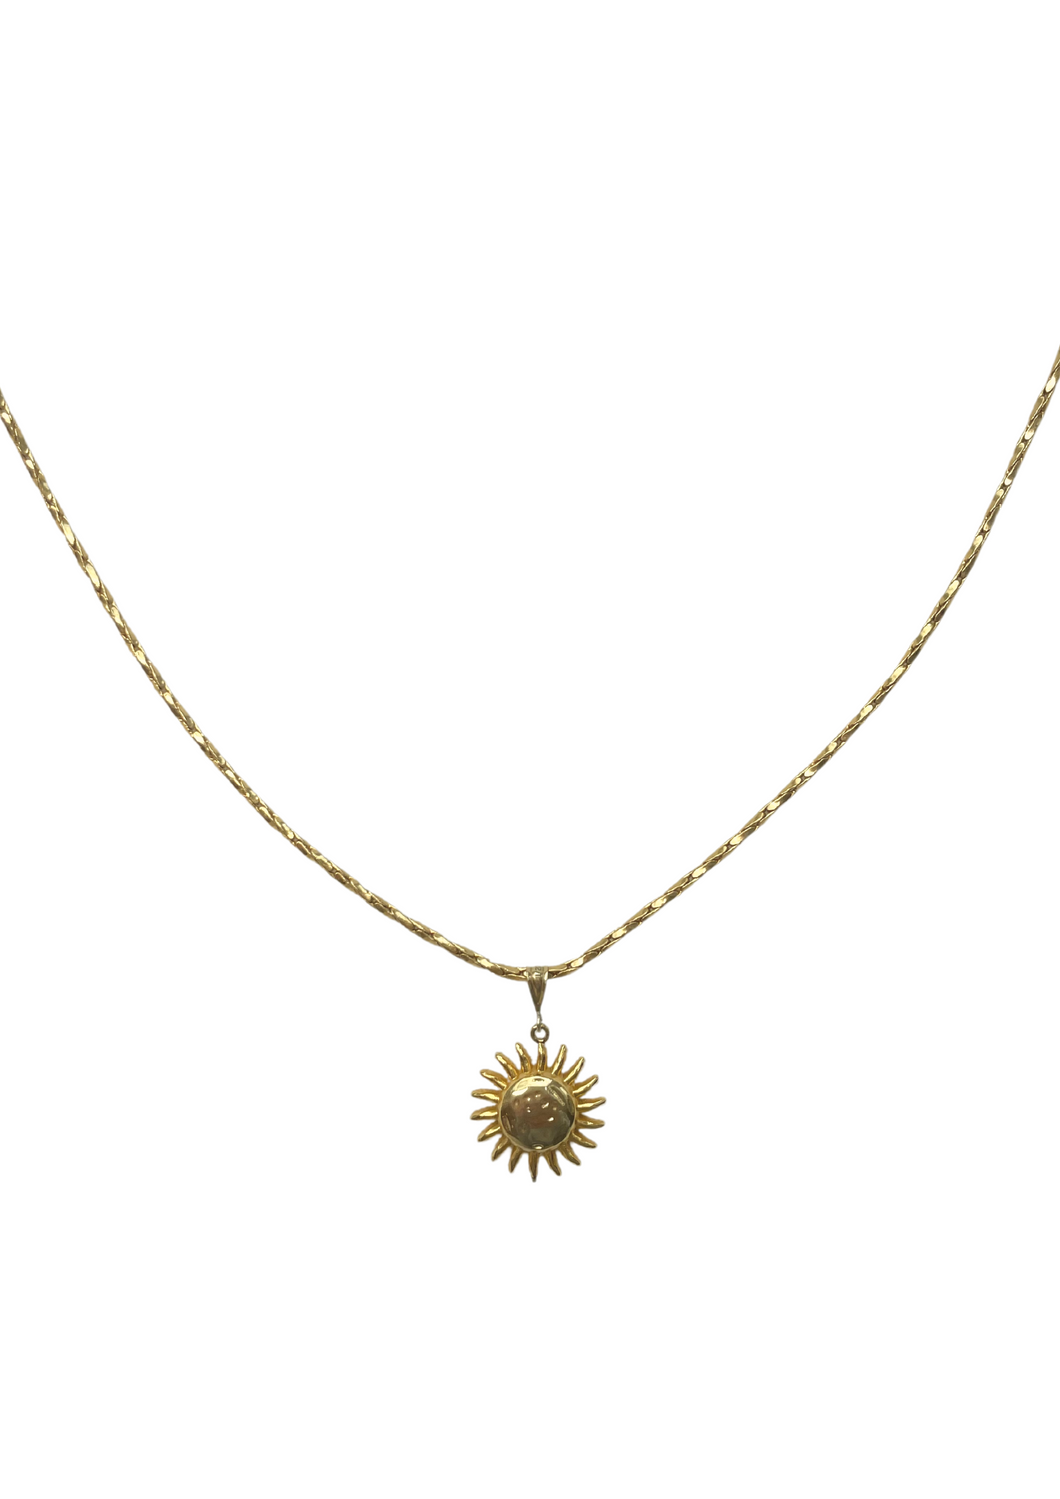 The Soleil Necklace